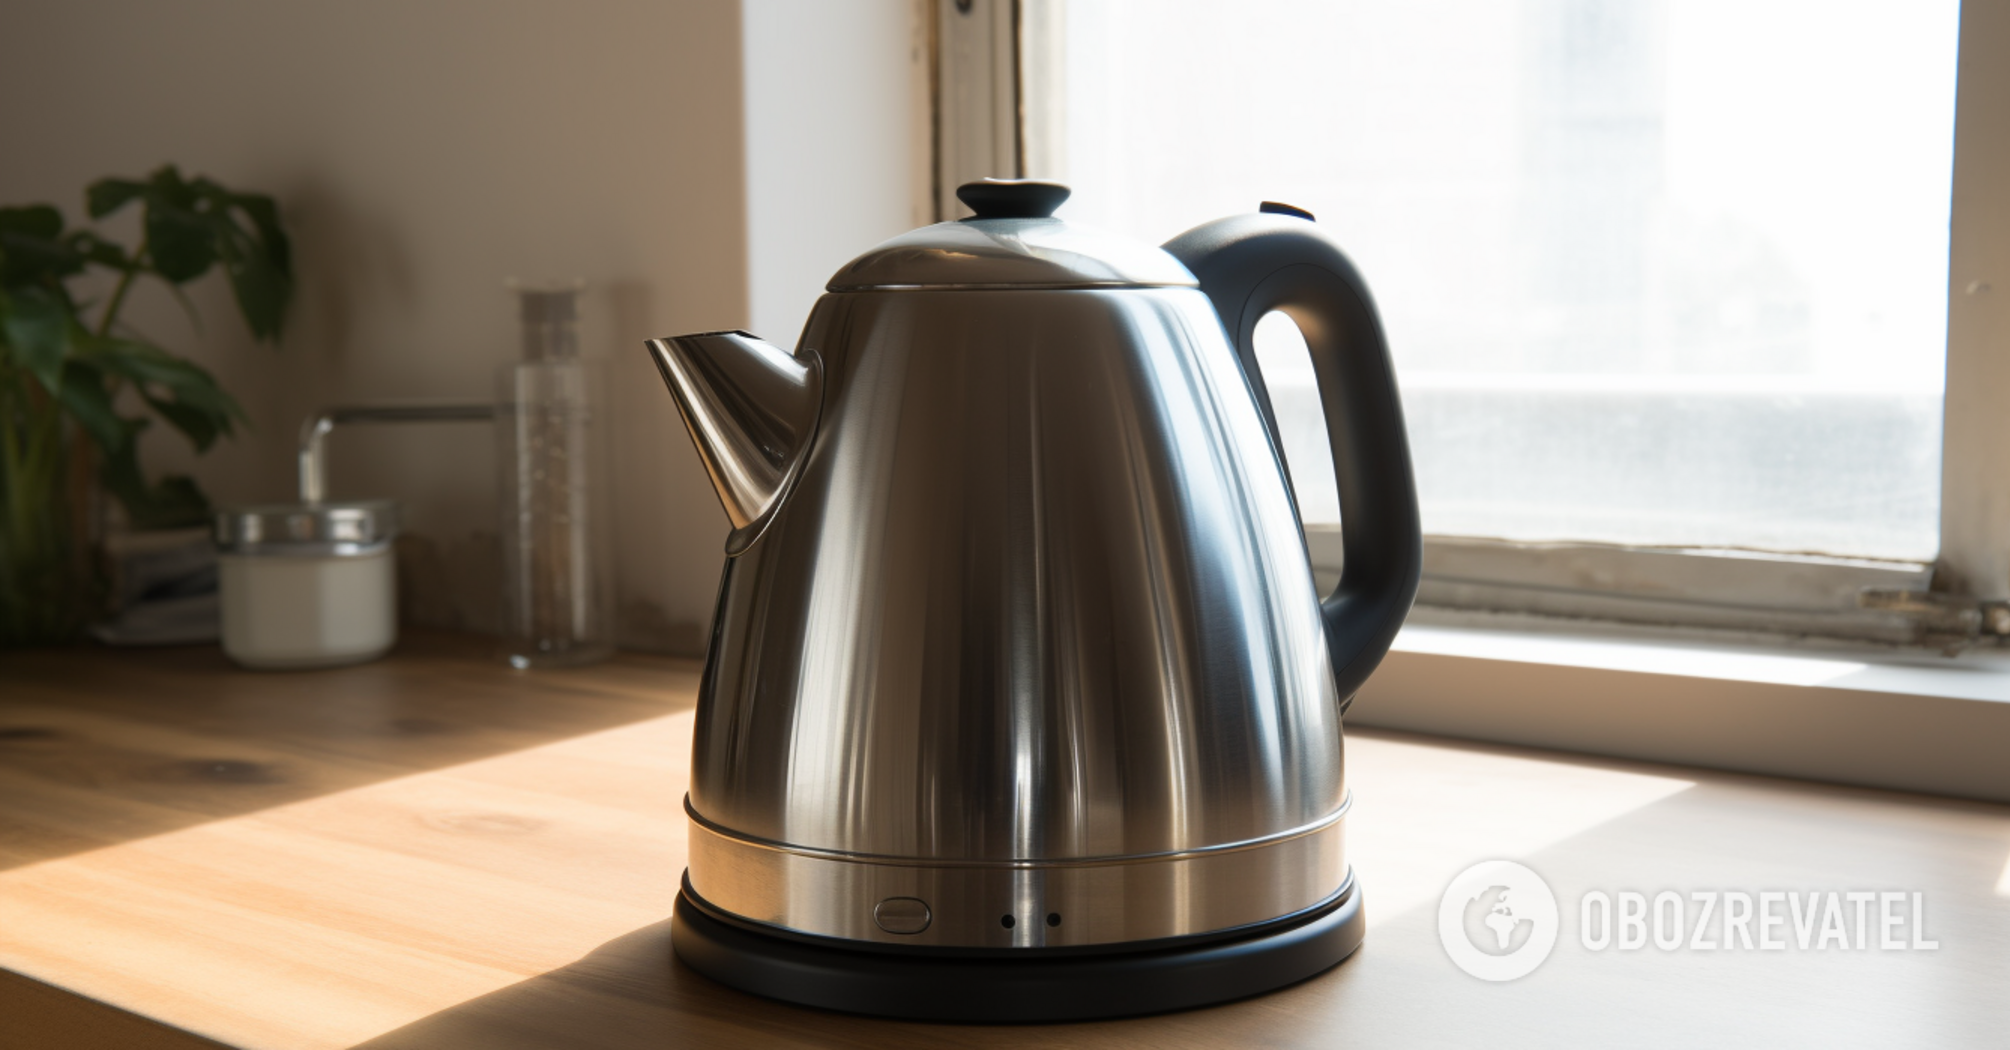 How to descale an electric kettle: the easiest method